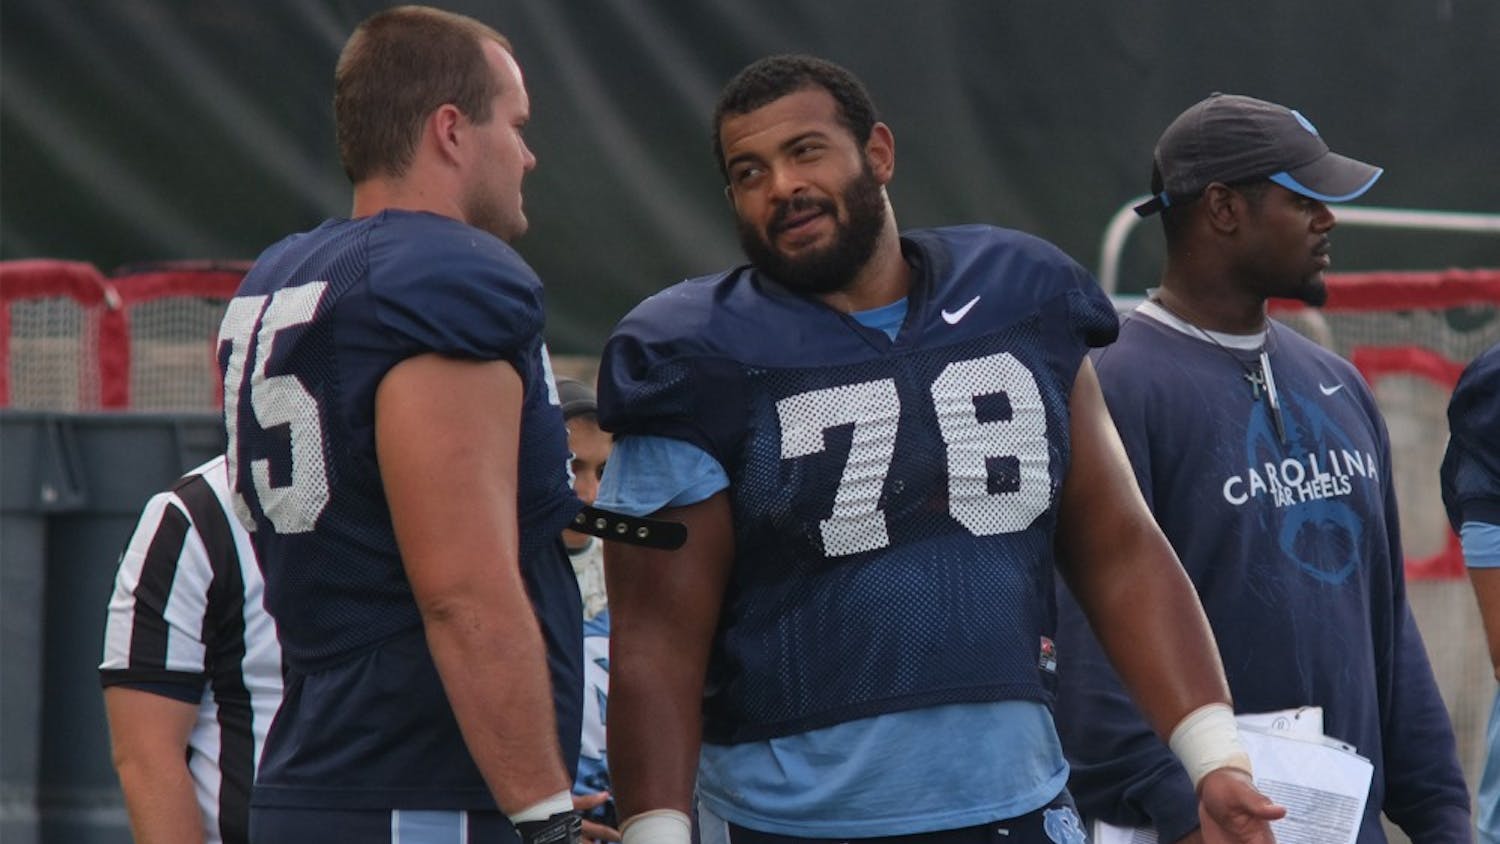 North Carolina senior offensive guard Landon Turner (78) talks with teammate Bentley Spain (75) during an afternoon practice.